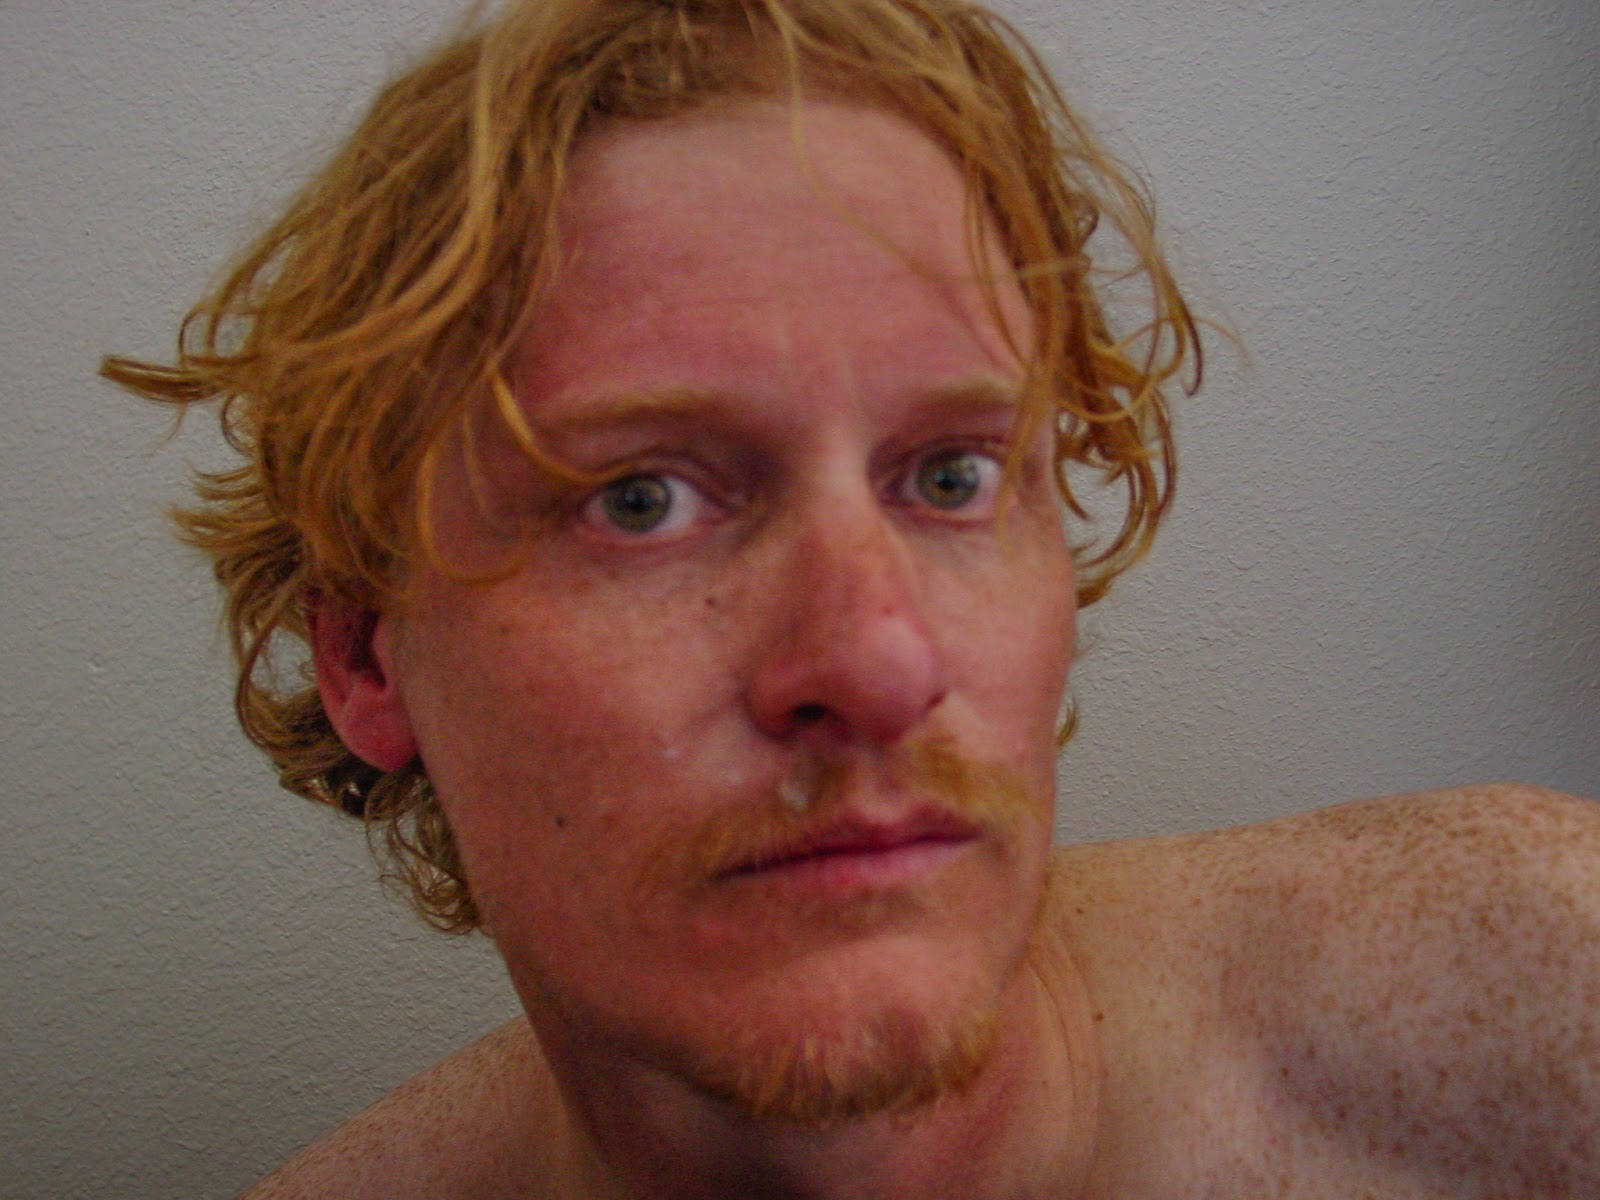 A photo of the author with disheveled hair and sunburned face. 